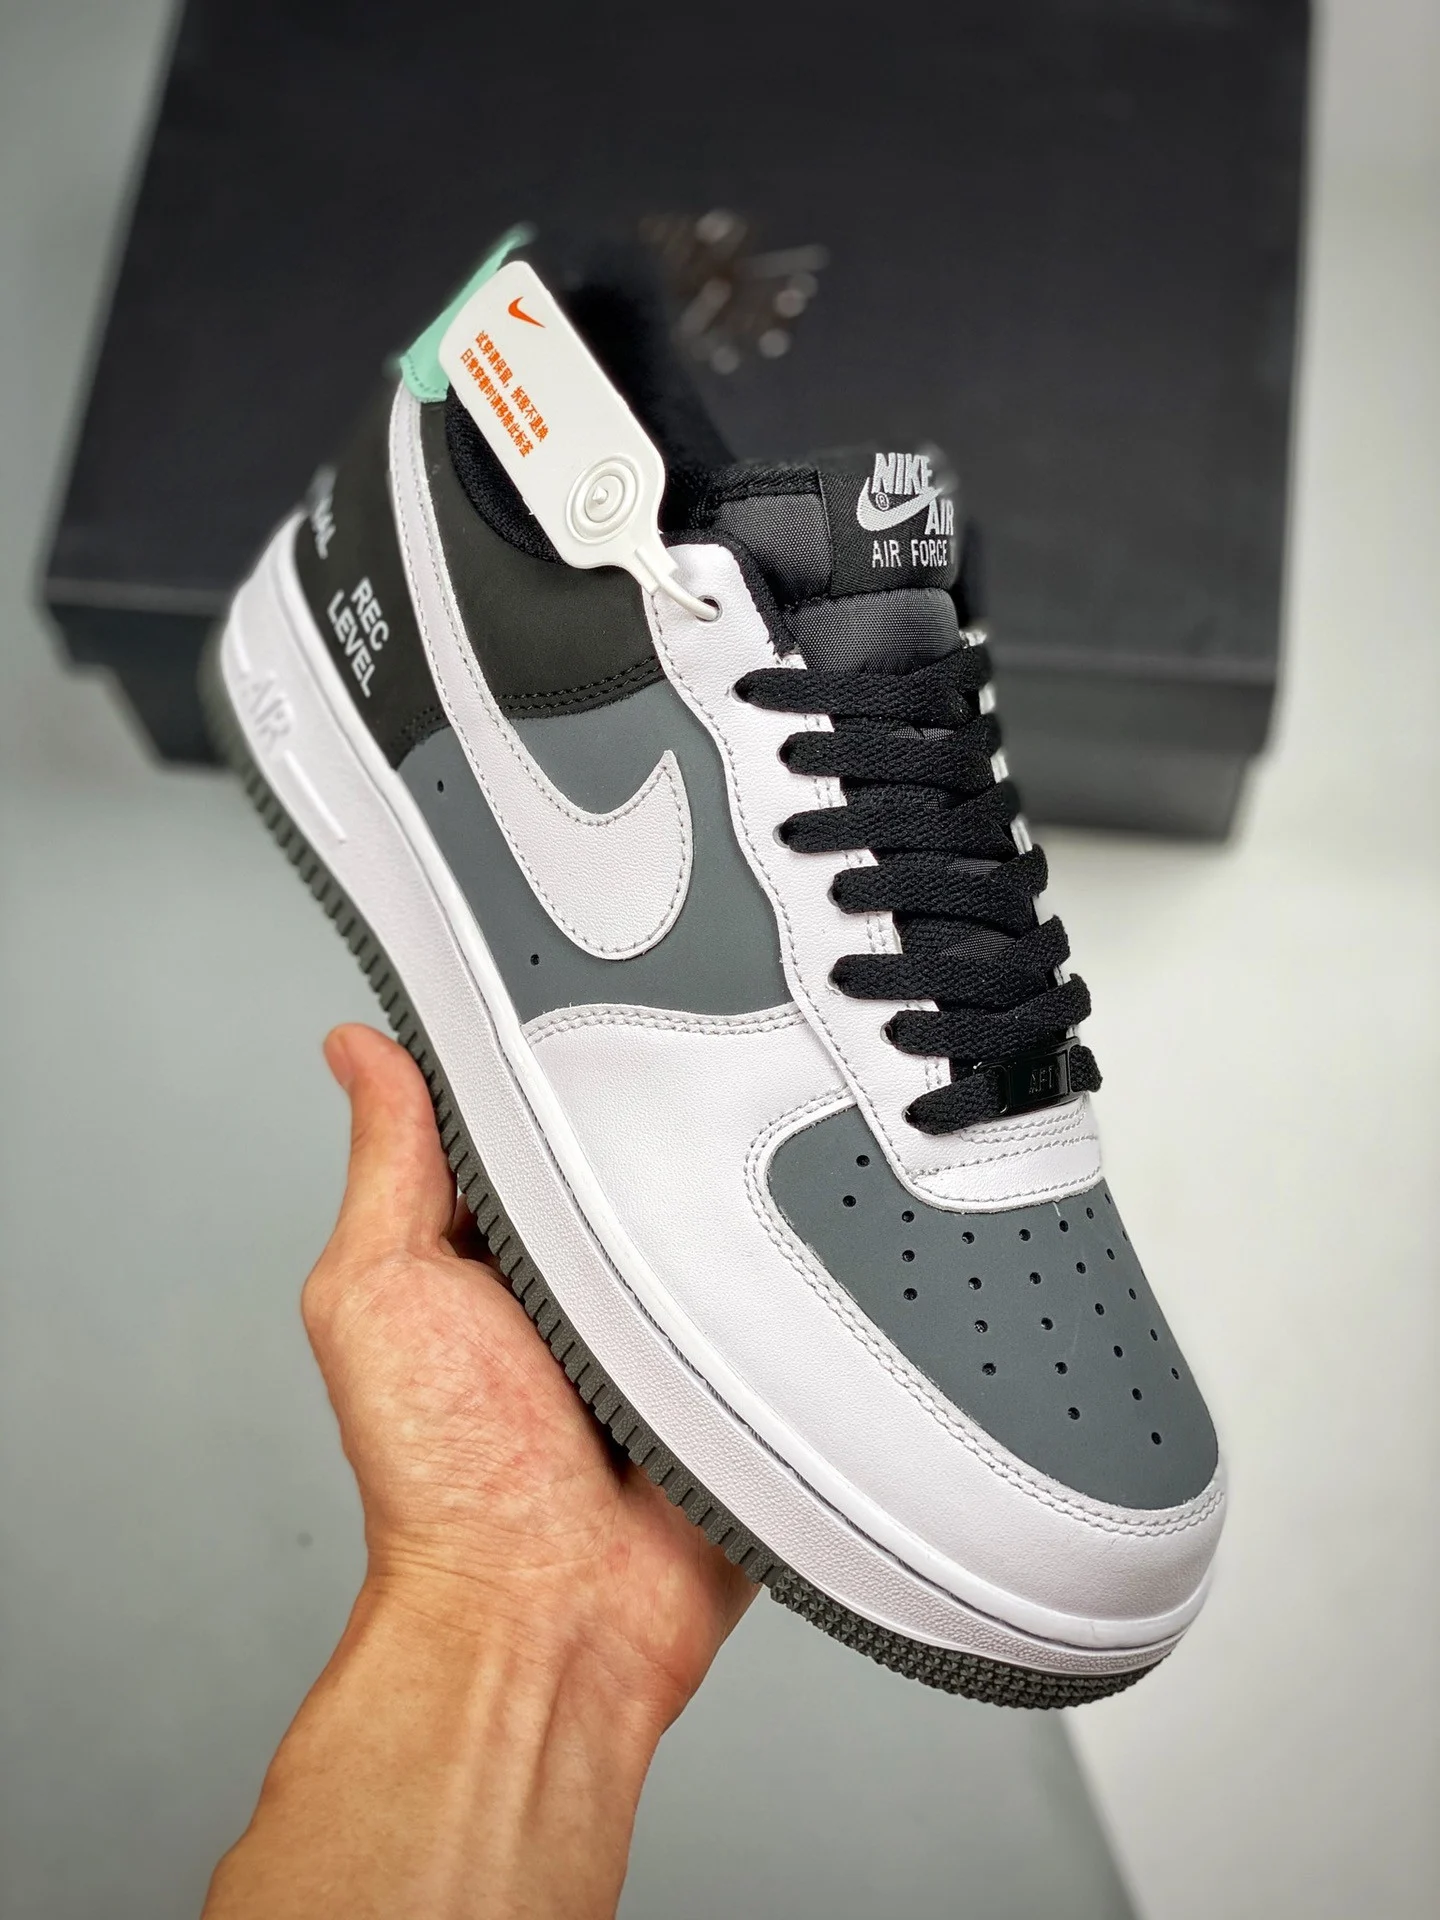 Nike Air Force 1 Low Black Dark Grey-White For Sale